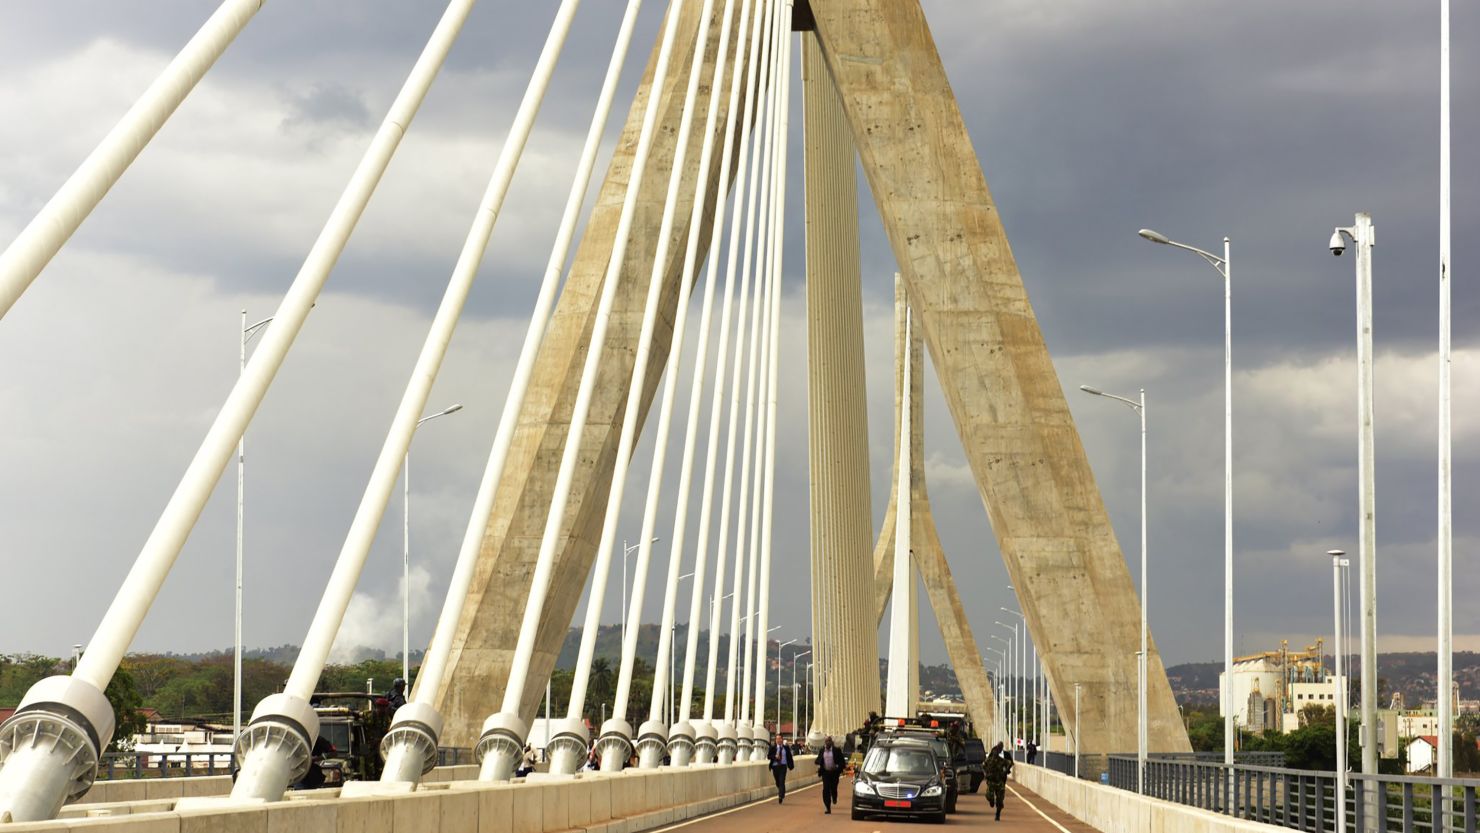 Source of the Nile is the fifth largest bridge in Africa.